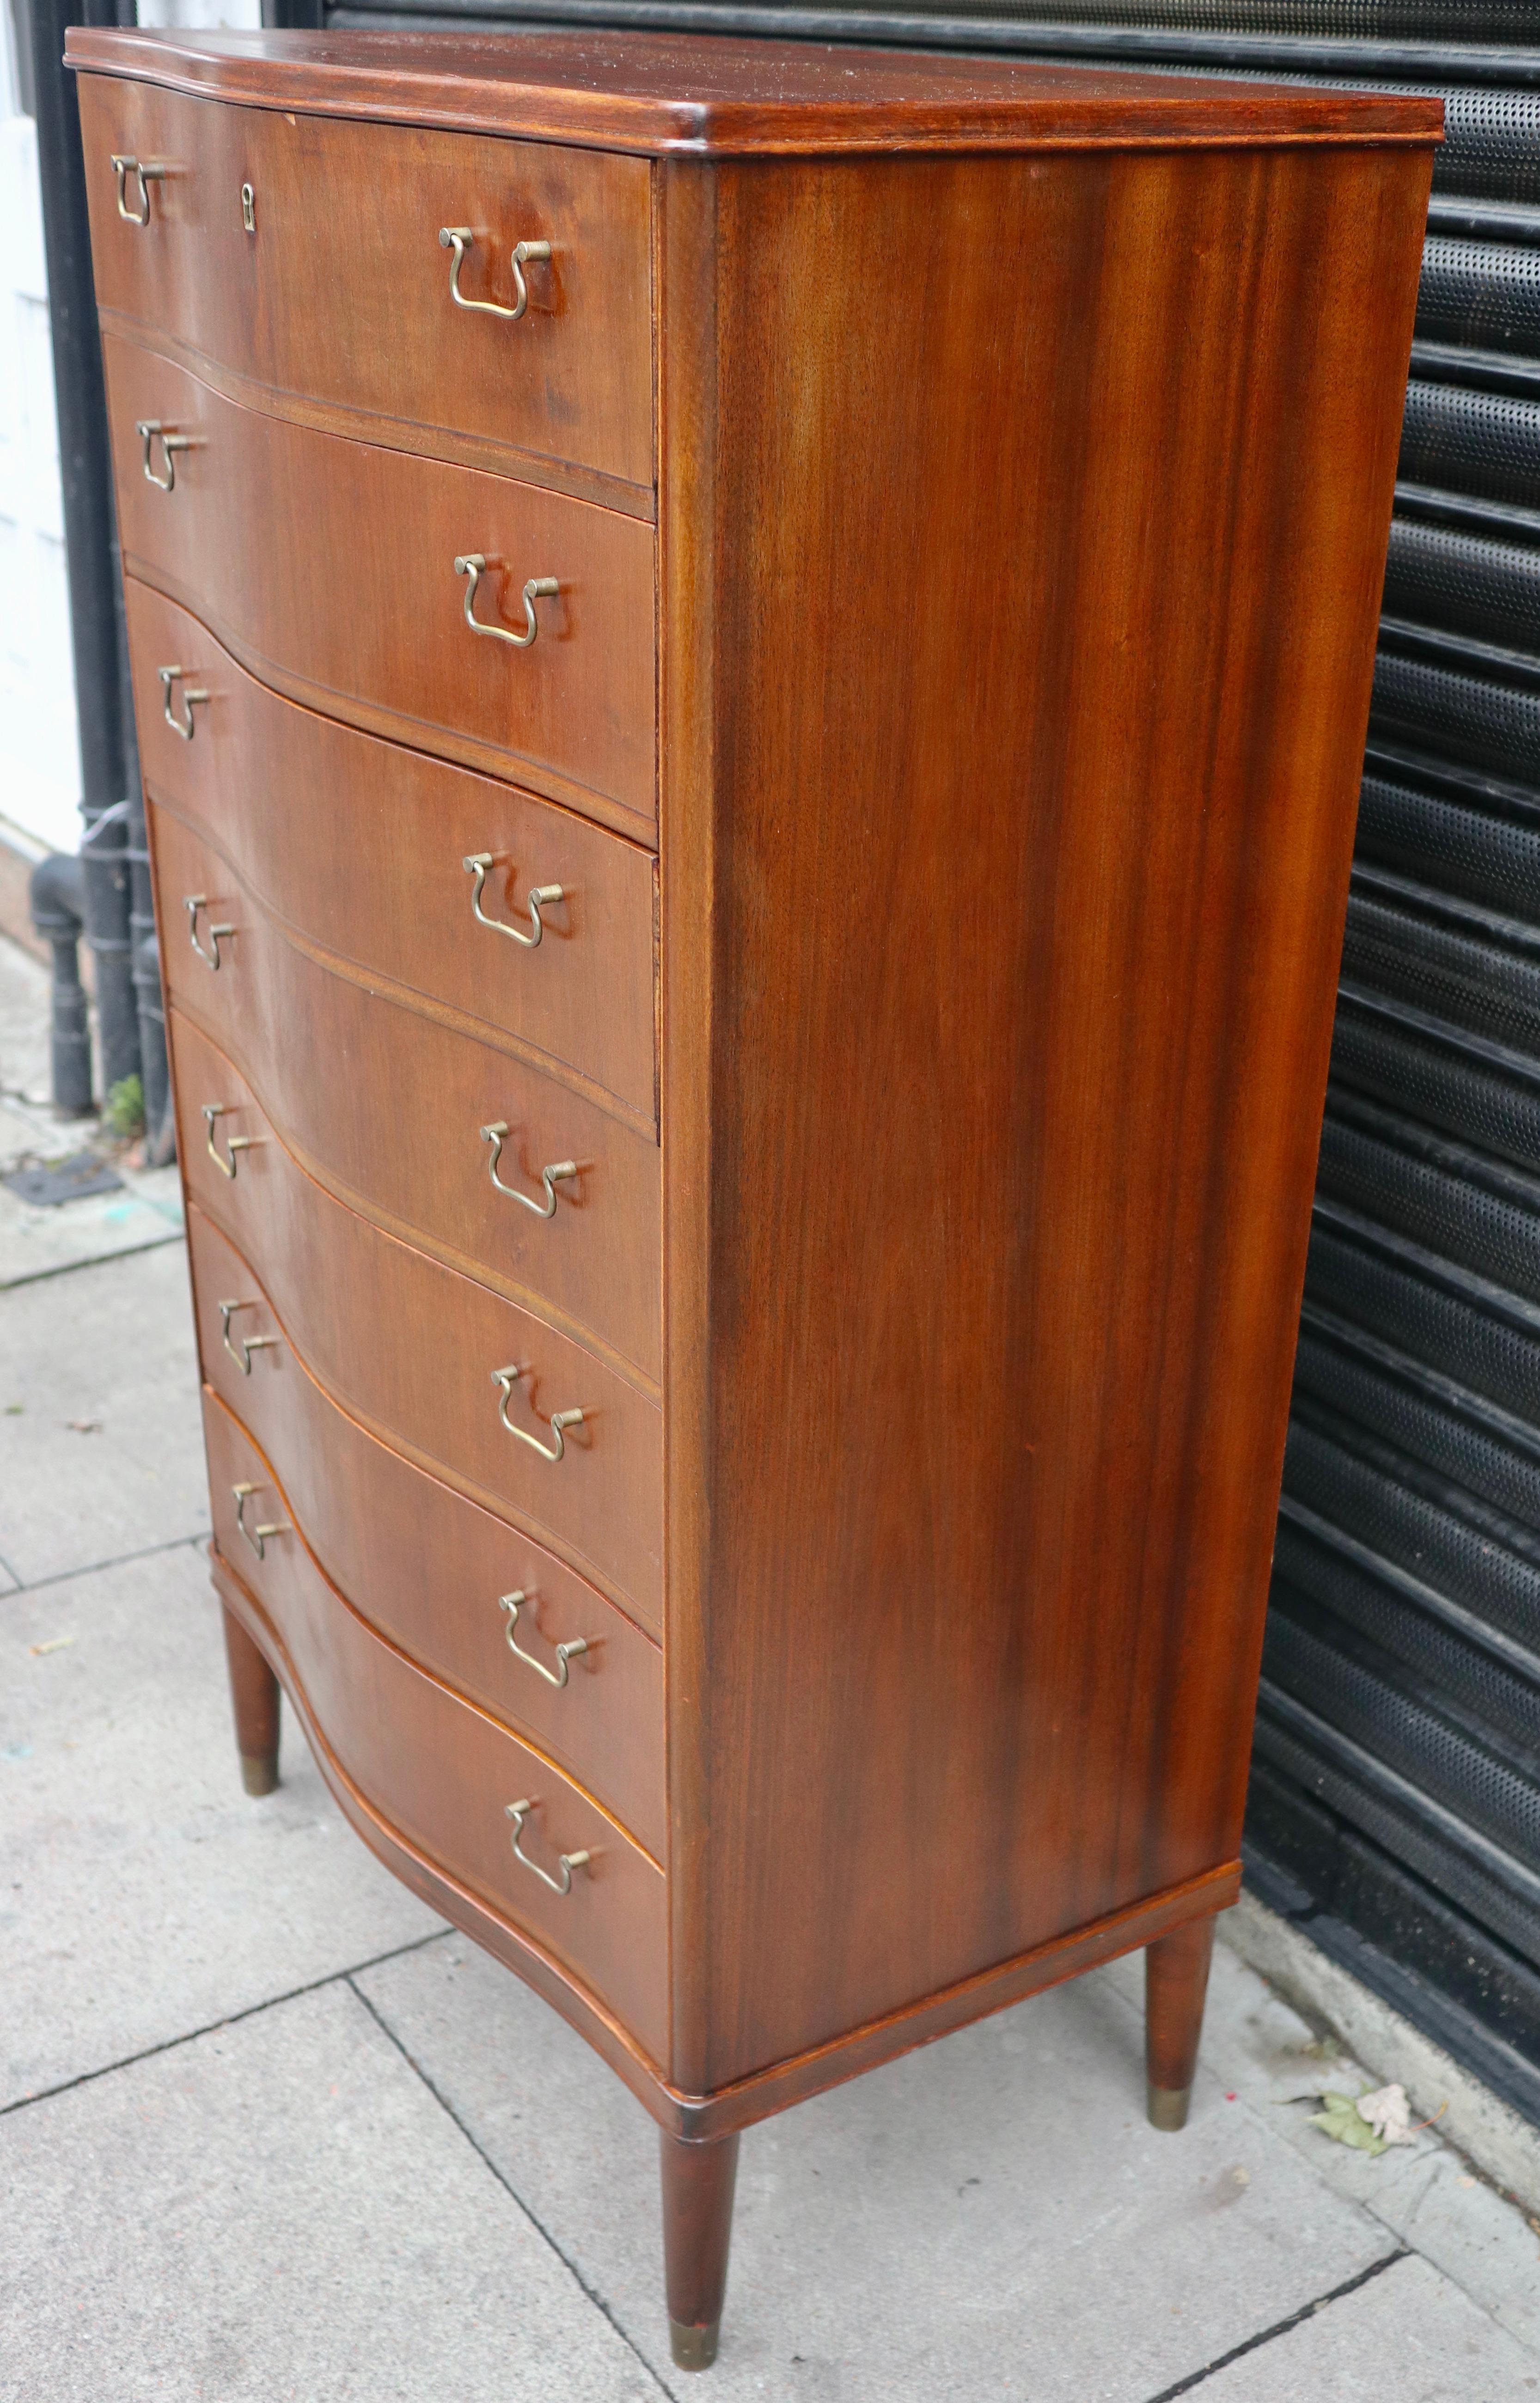 A vintage 1950s mahogany veneered serpentine fronted,  seven drawer 'tall boy' chest of drawers on a solid mahogany base with brass fittings.  This piece is fitted with brass handles and is in good vintage condition, when you consider it's age. It